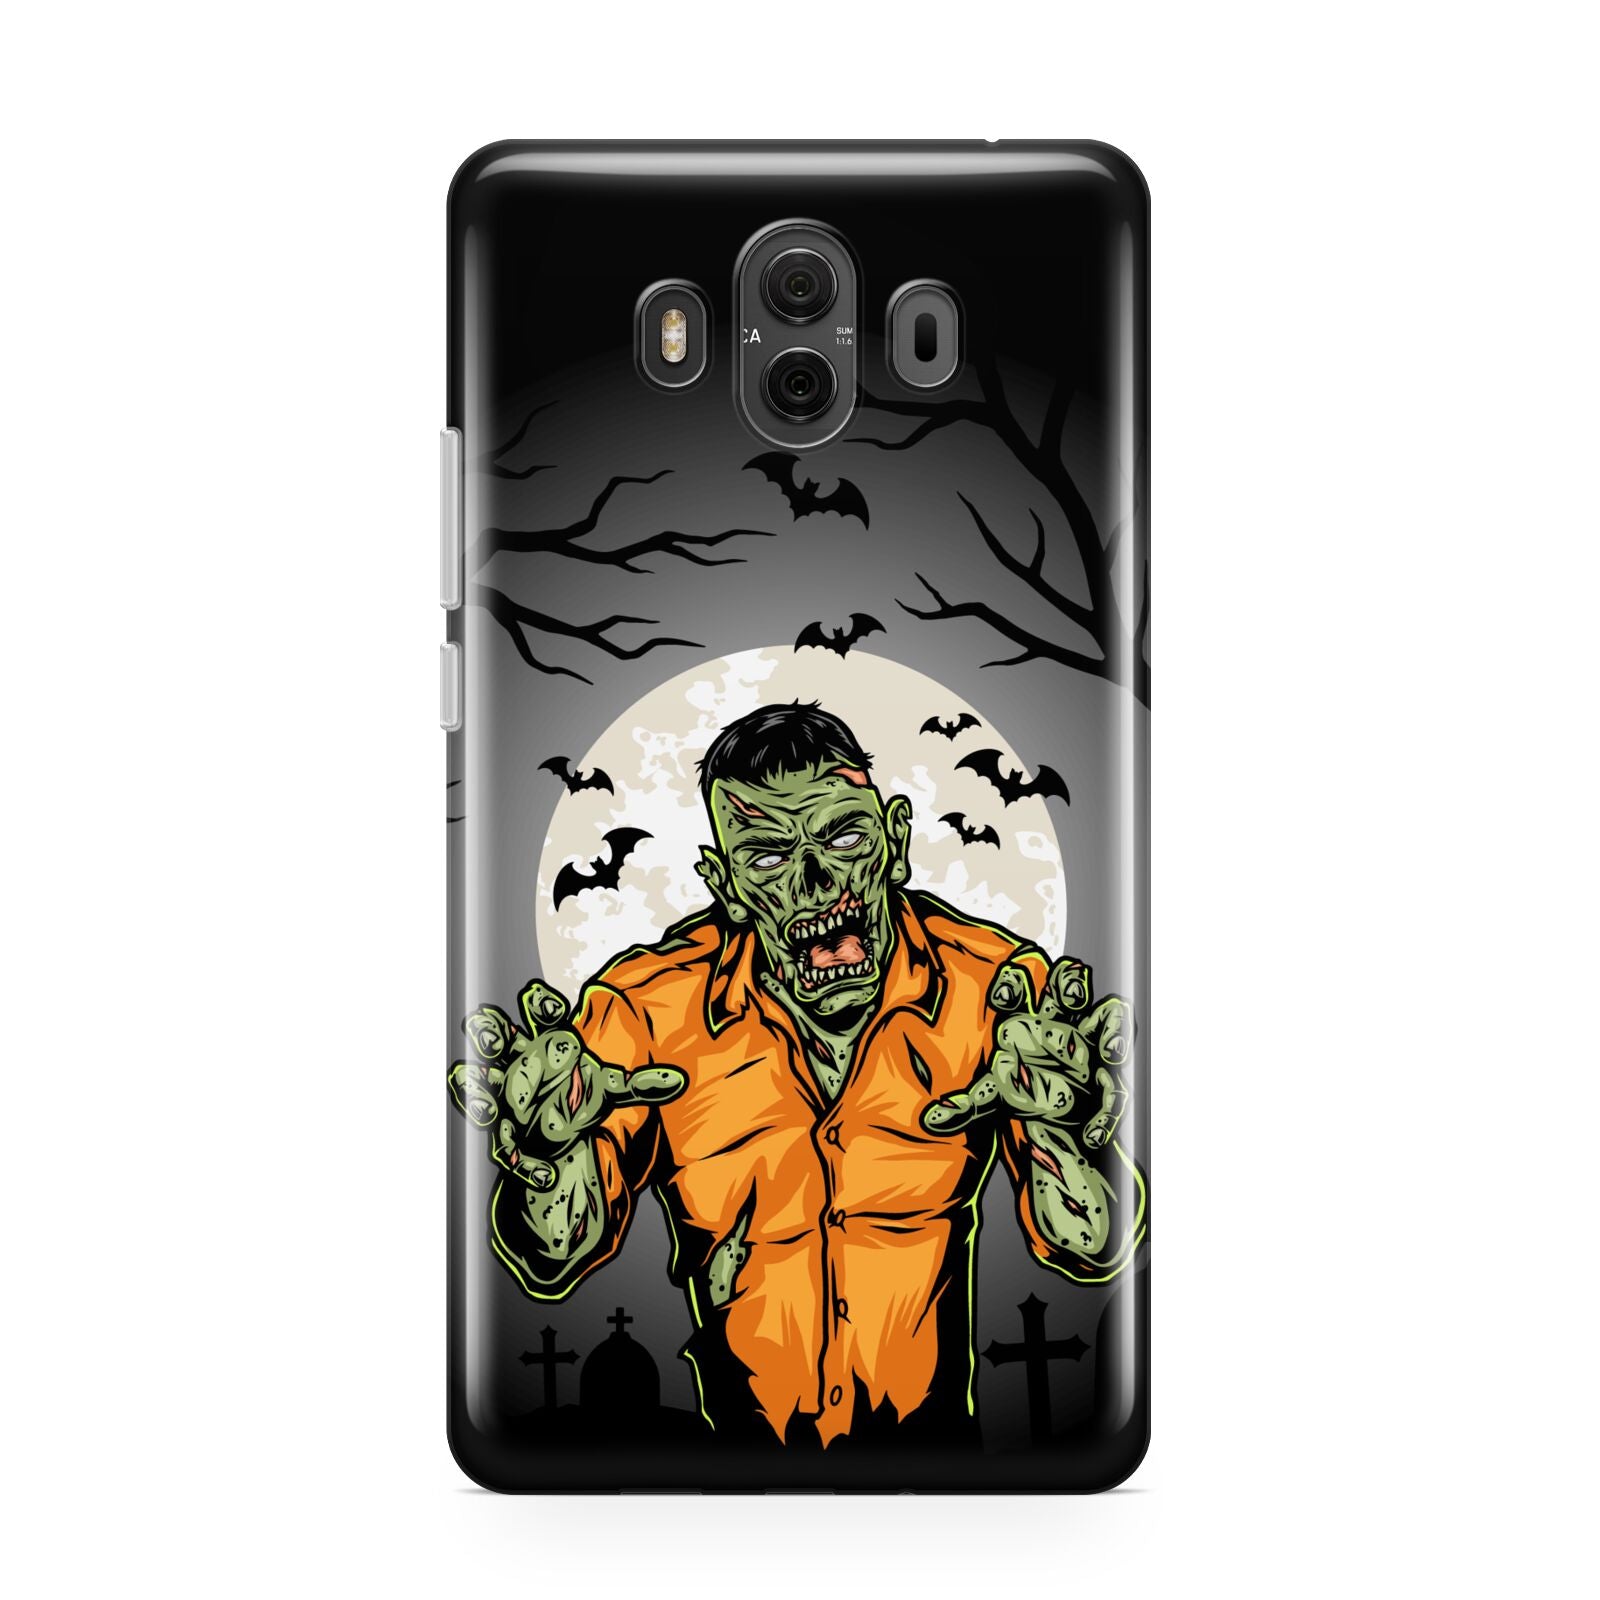 Zombie Night Huawei Mate 10 Protective Phone Case